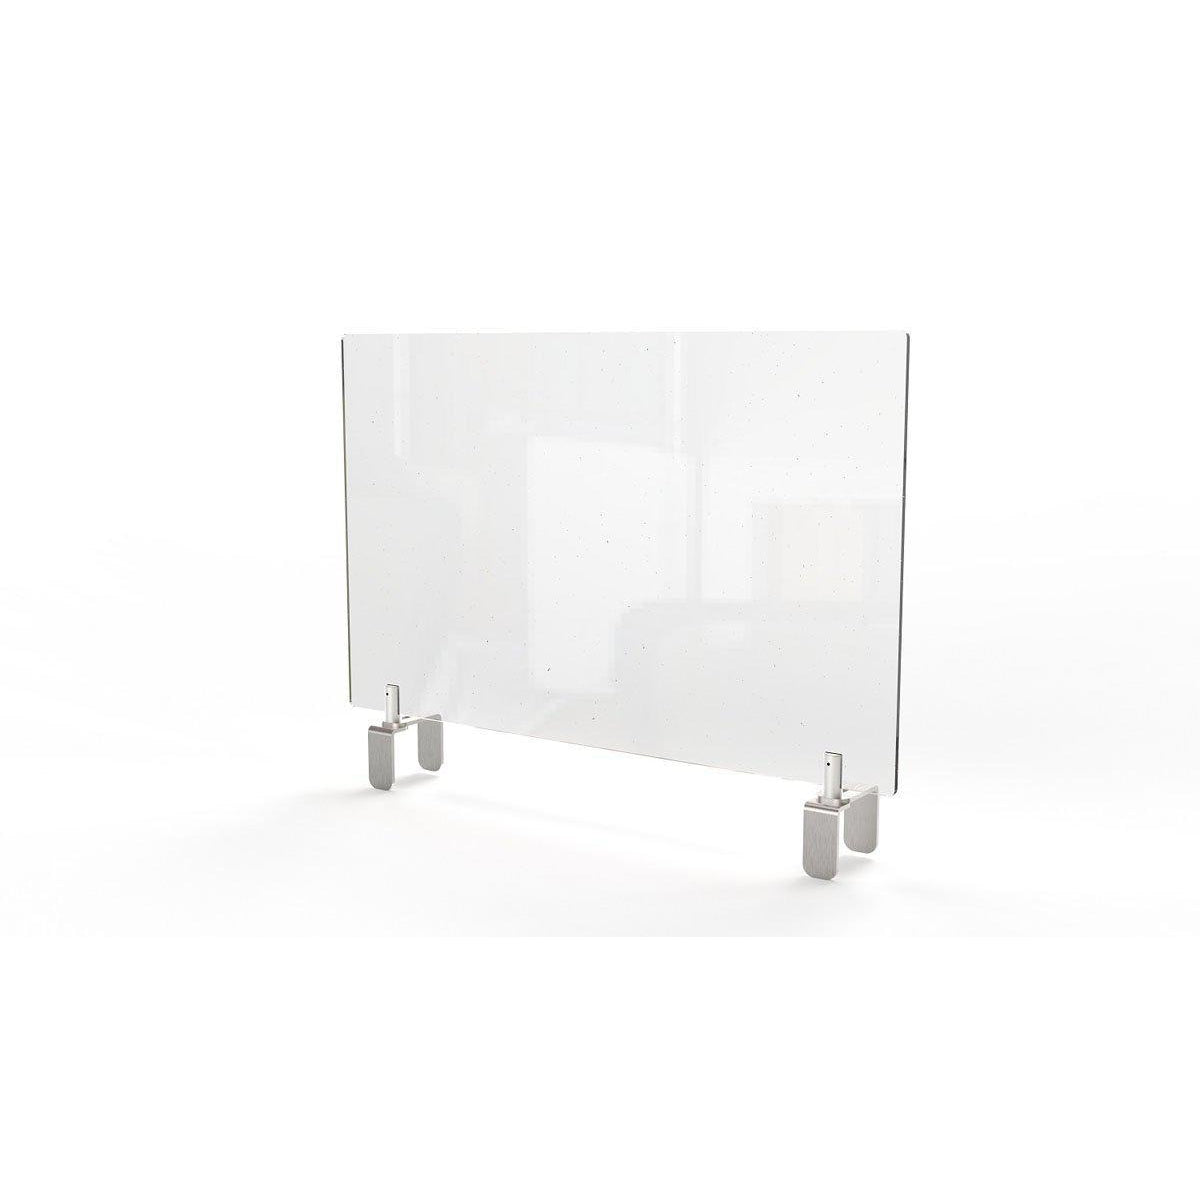 Clear Thermoplastic Partition & Cubicle Extender with Adjustable Clamp Attachment, 30"H x 36"W